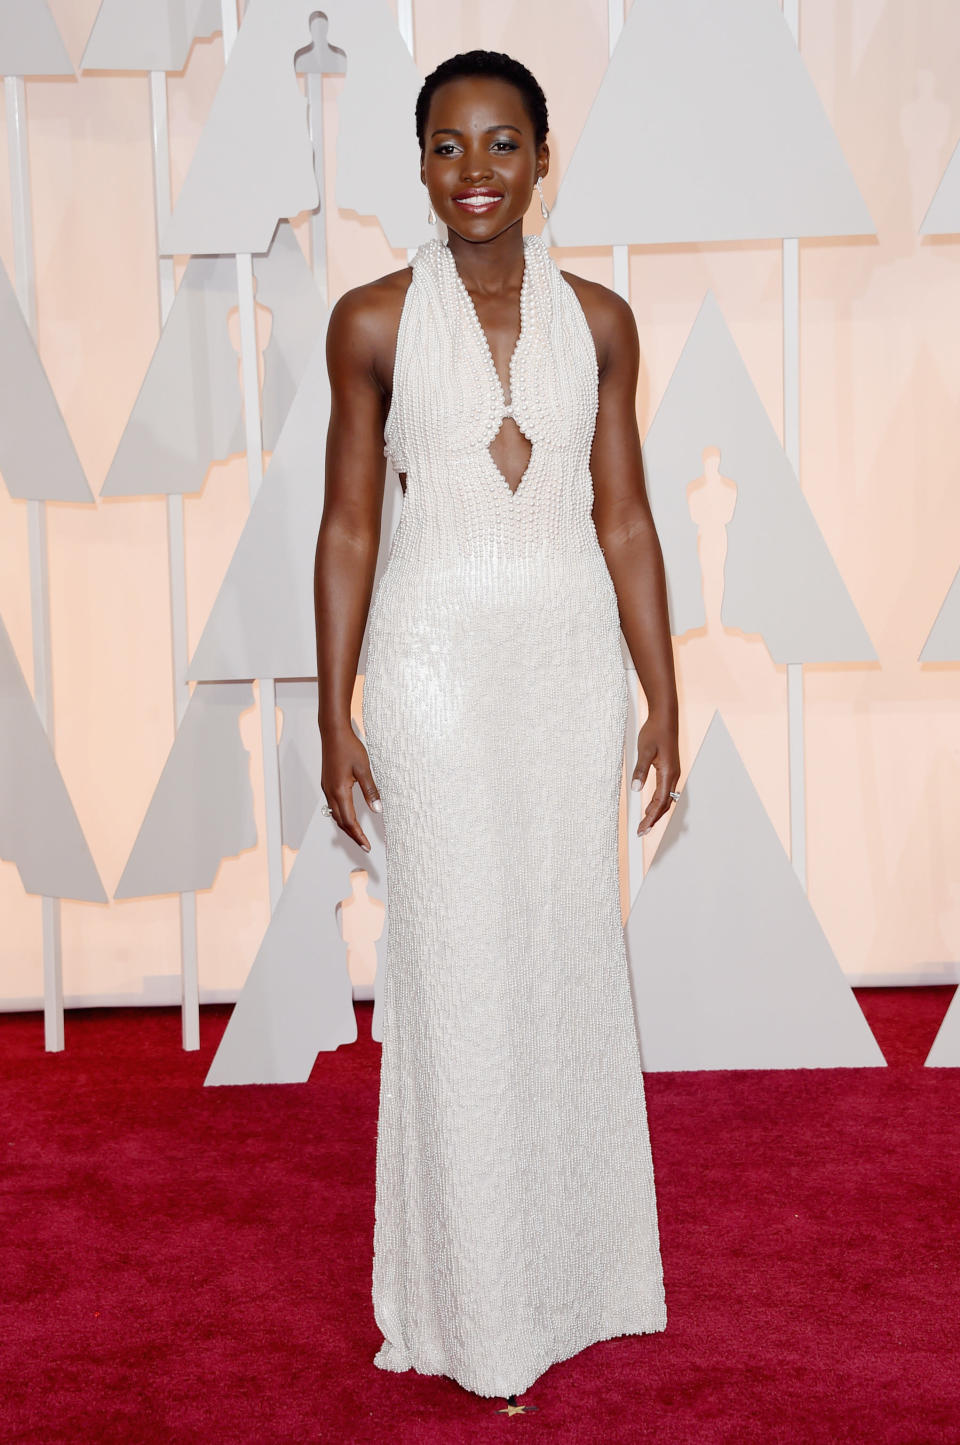 Lupita wearing a gown of all white pearls